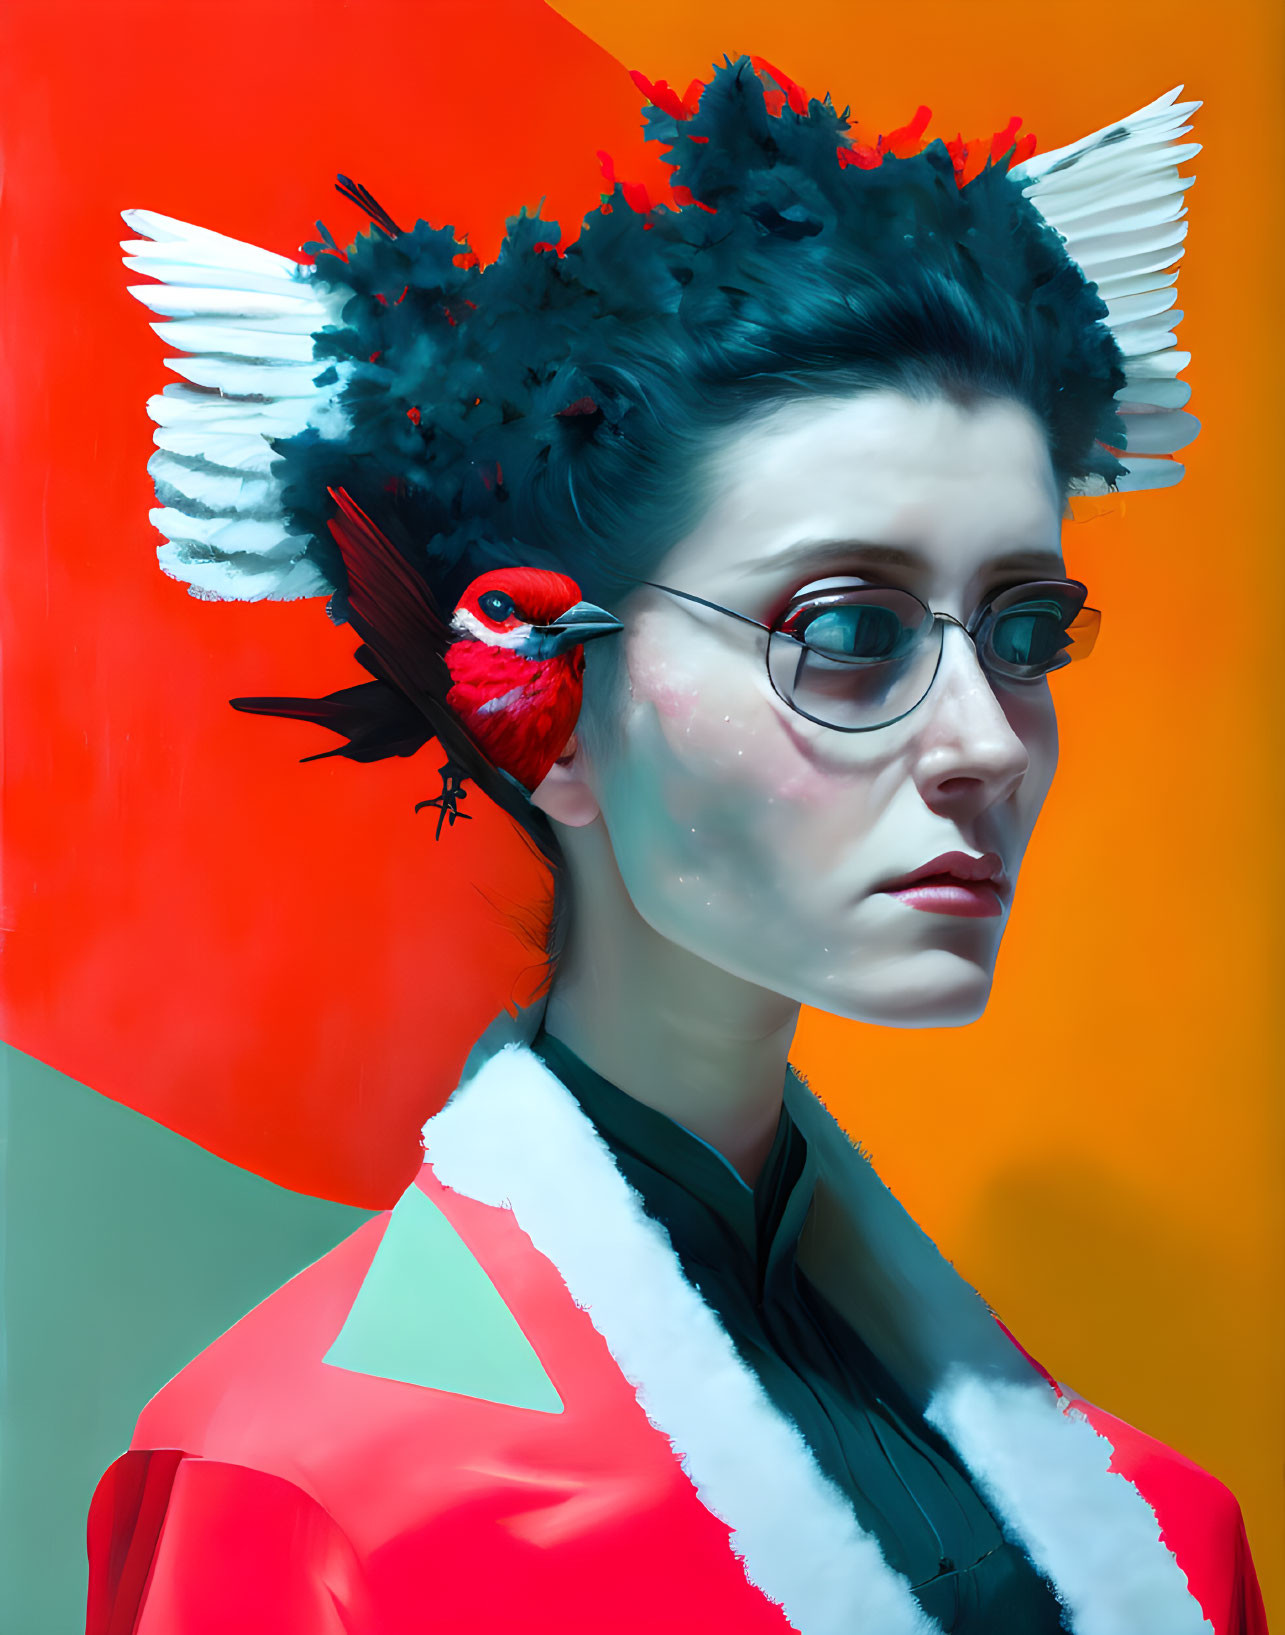 Woman with Glasses and Red Bird Headpiece on Orange and Teal Background